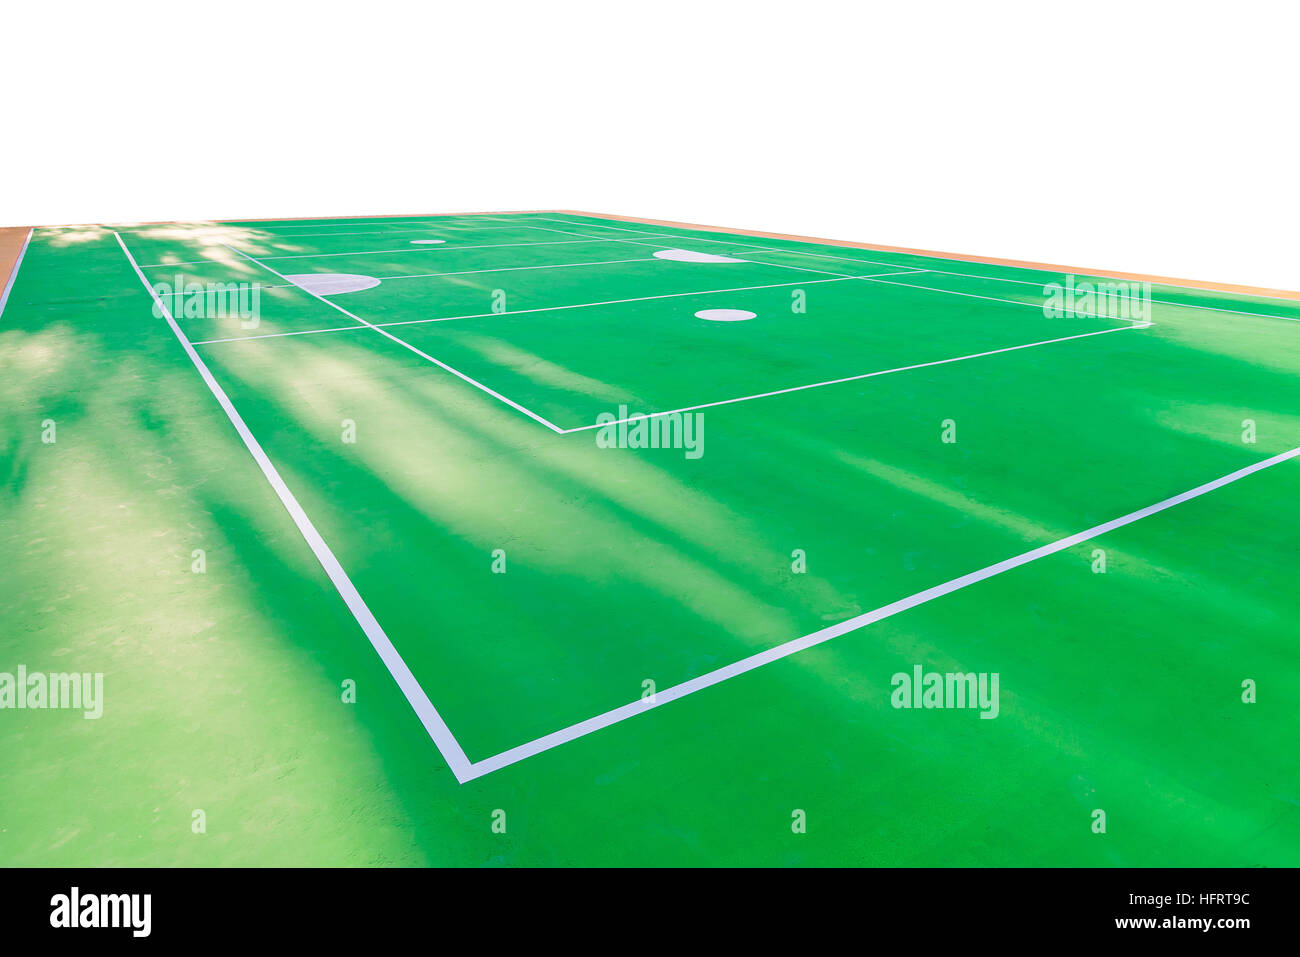 Empty rattan ball court with sunlight in summer. green court floor with white line. Stock Photo